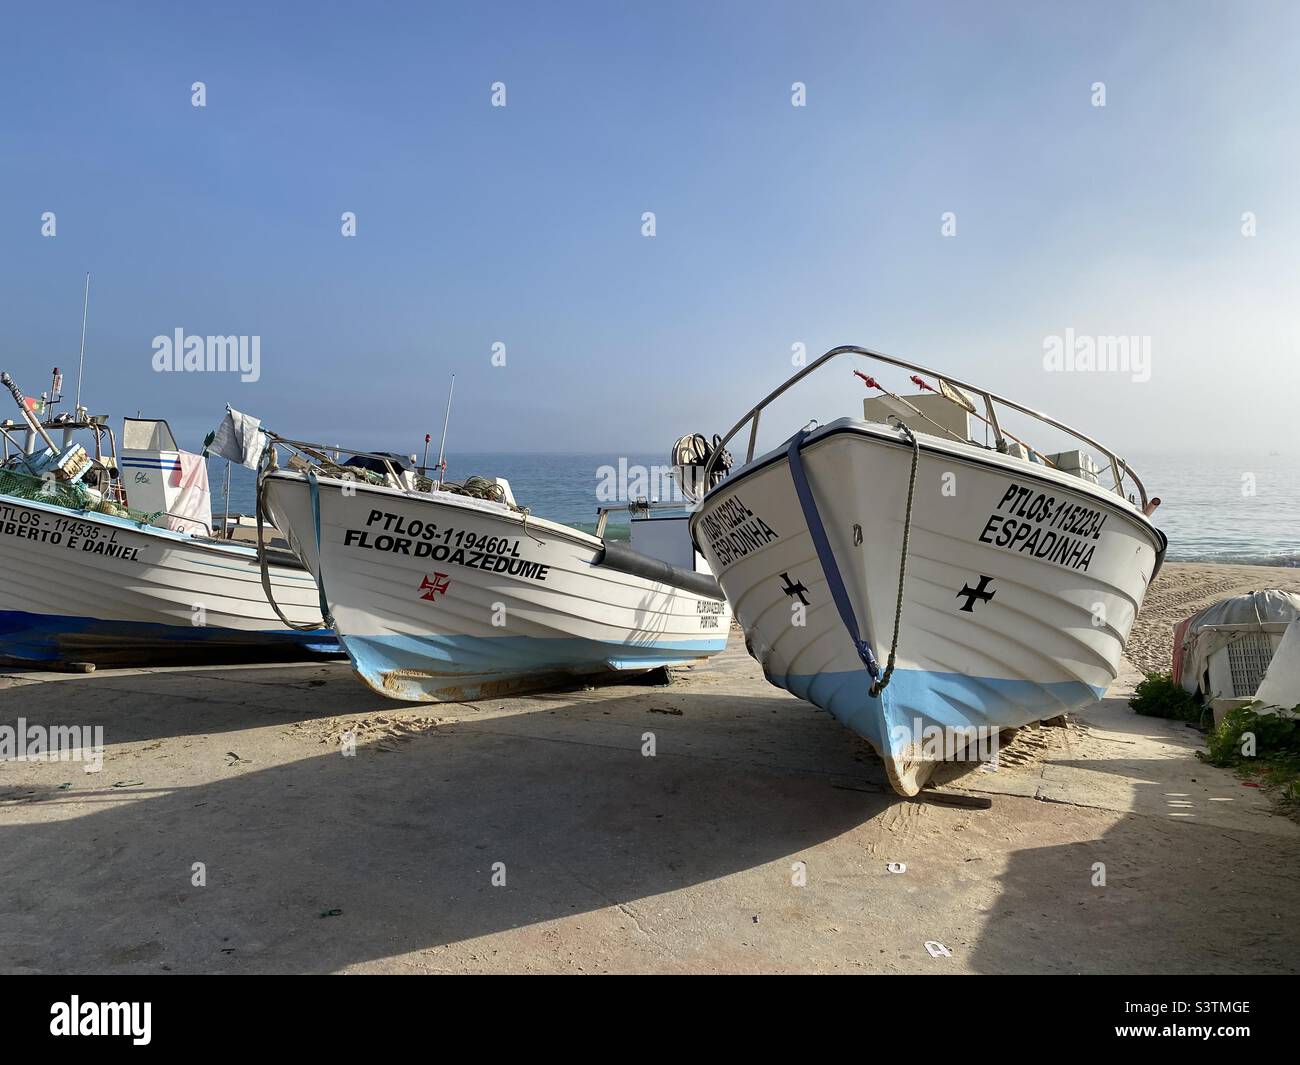 Fishing boats by the beach in Salema, Portugal Stock Photo